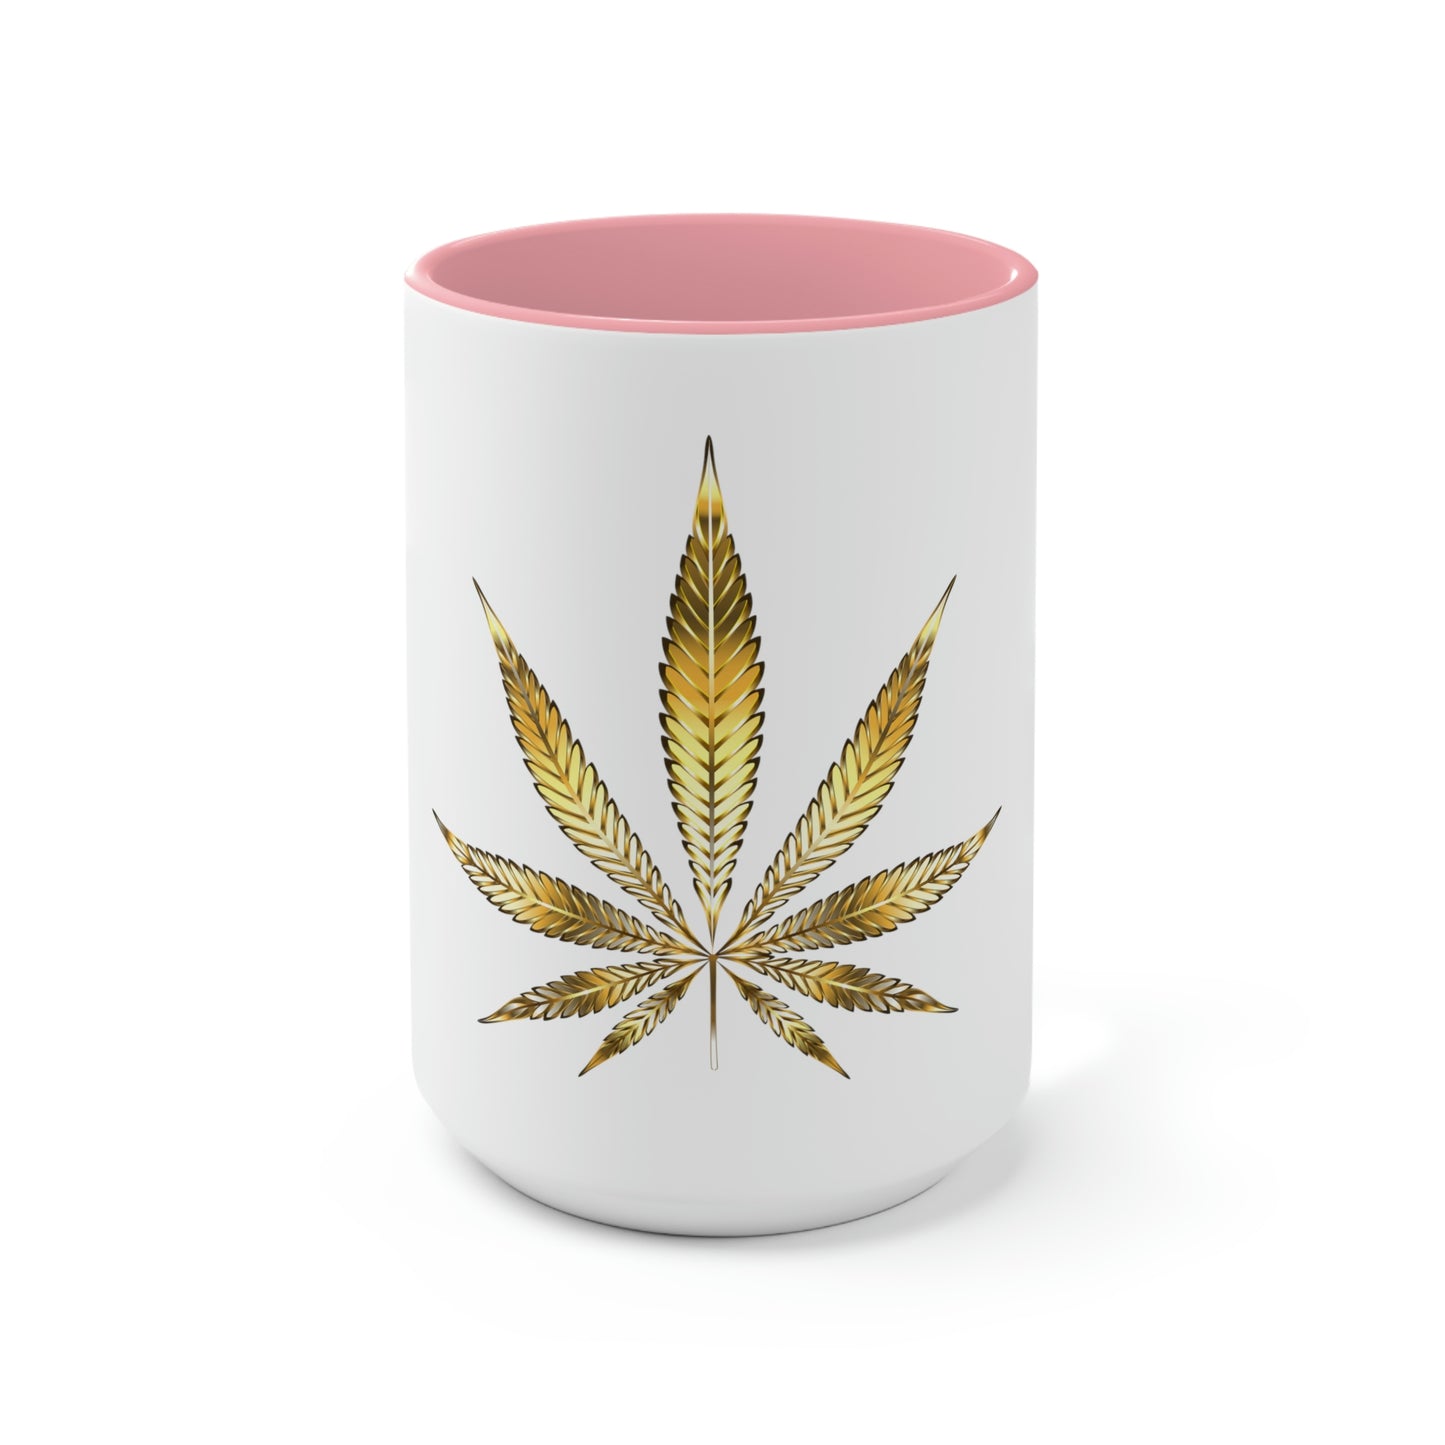 A white cannabis mug with a pink interior featuring a bright gold weed leaf on the front center.